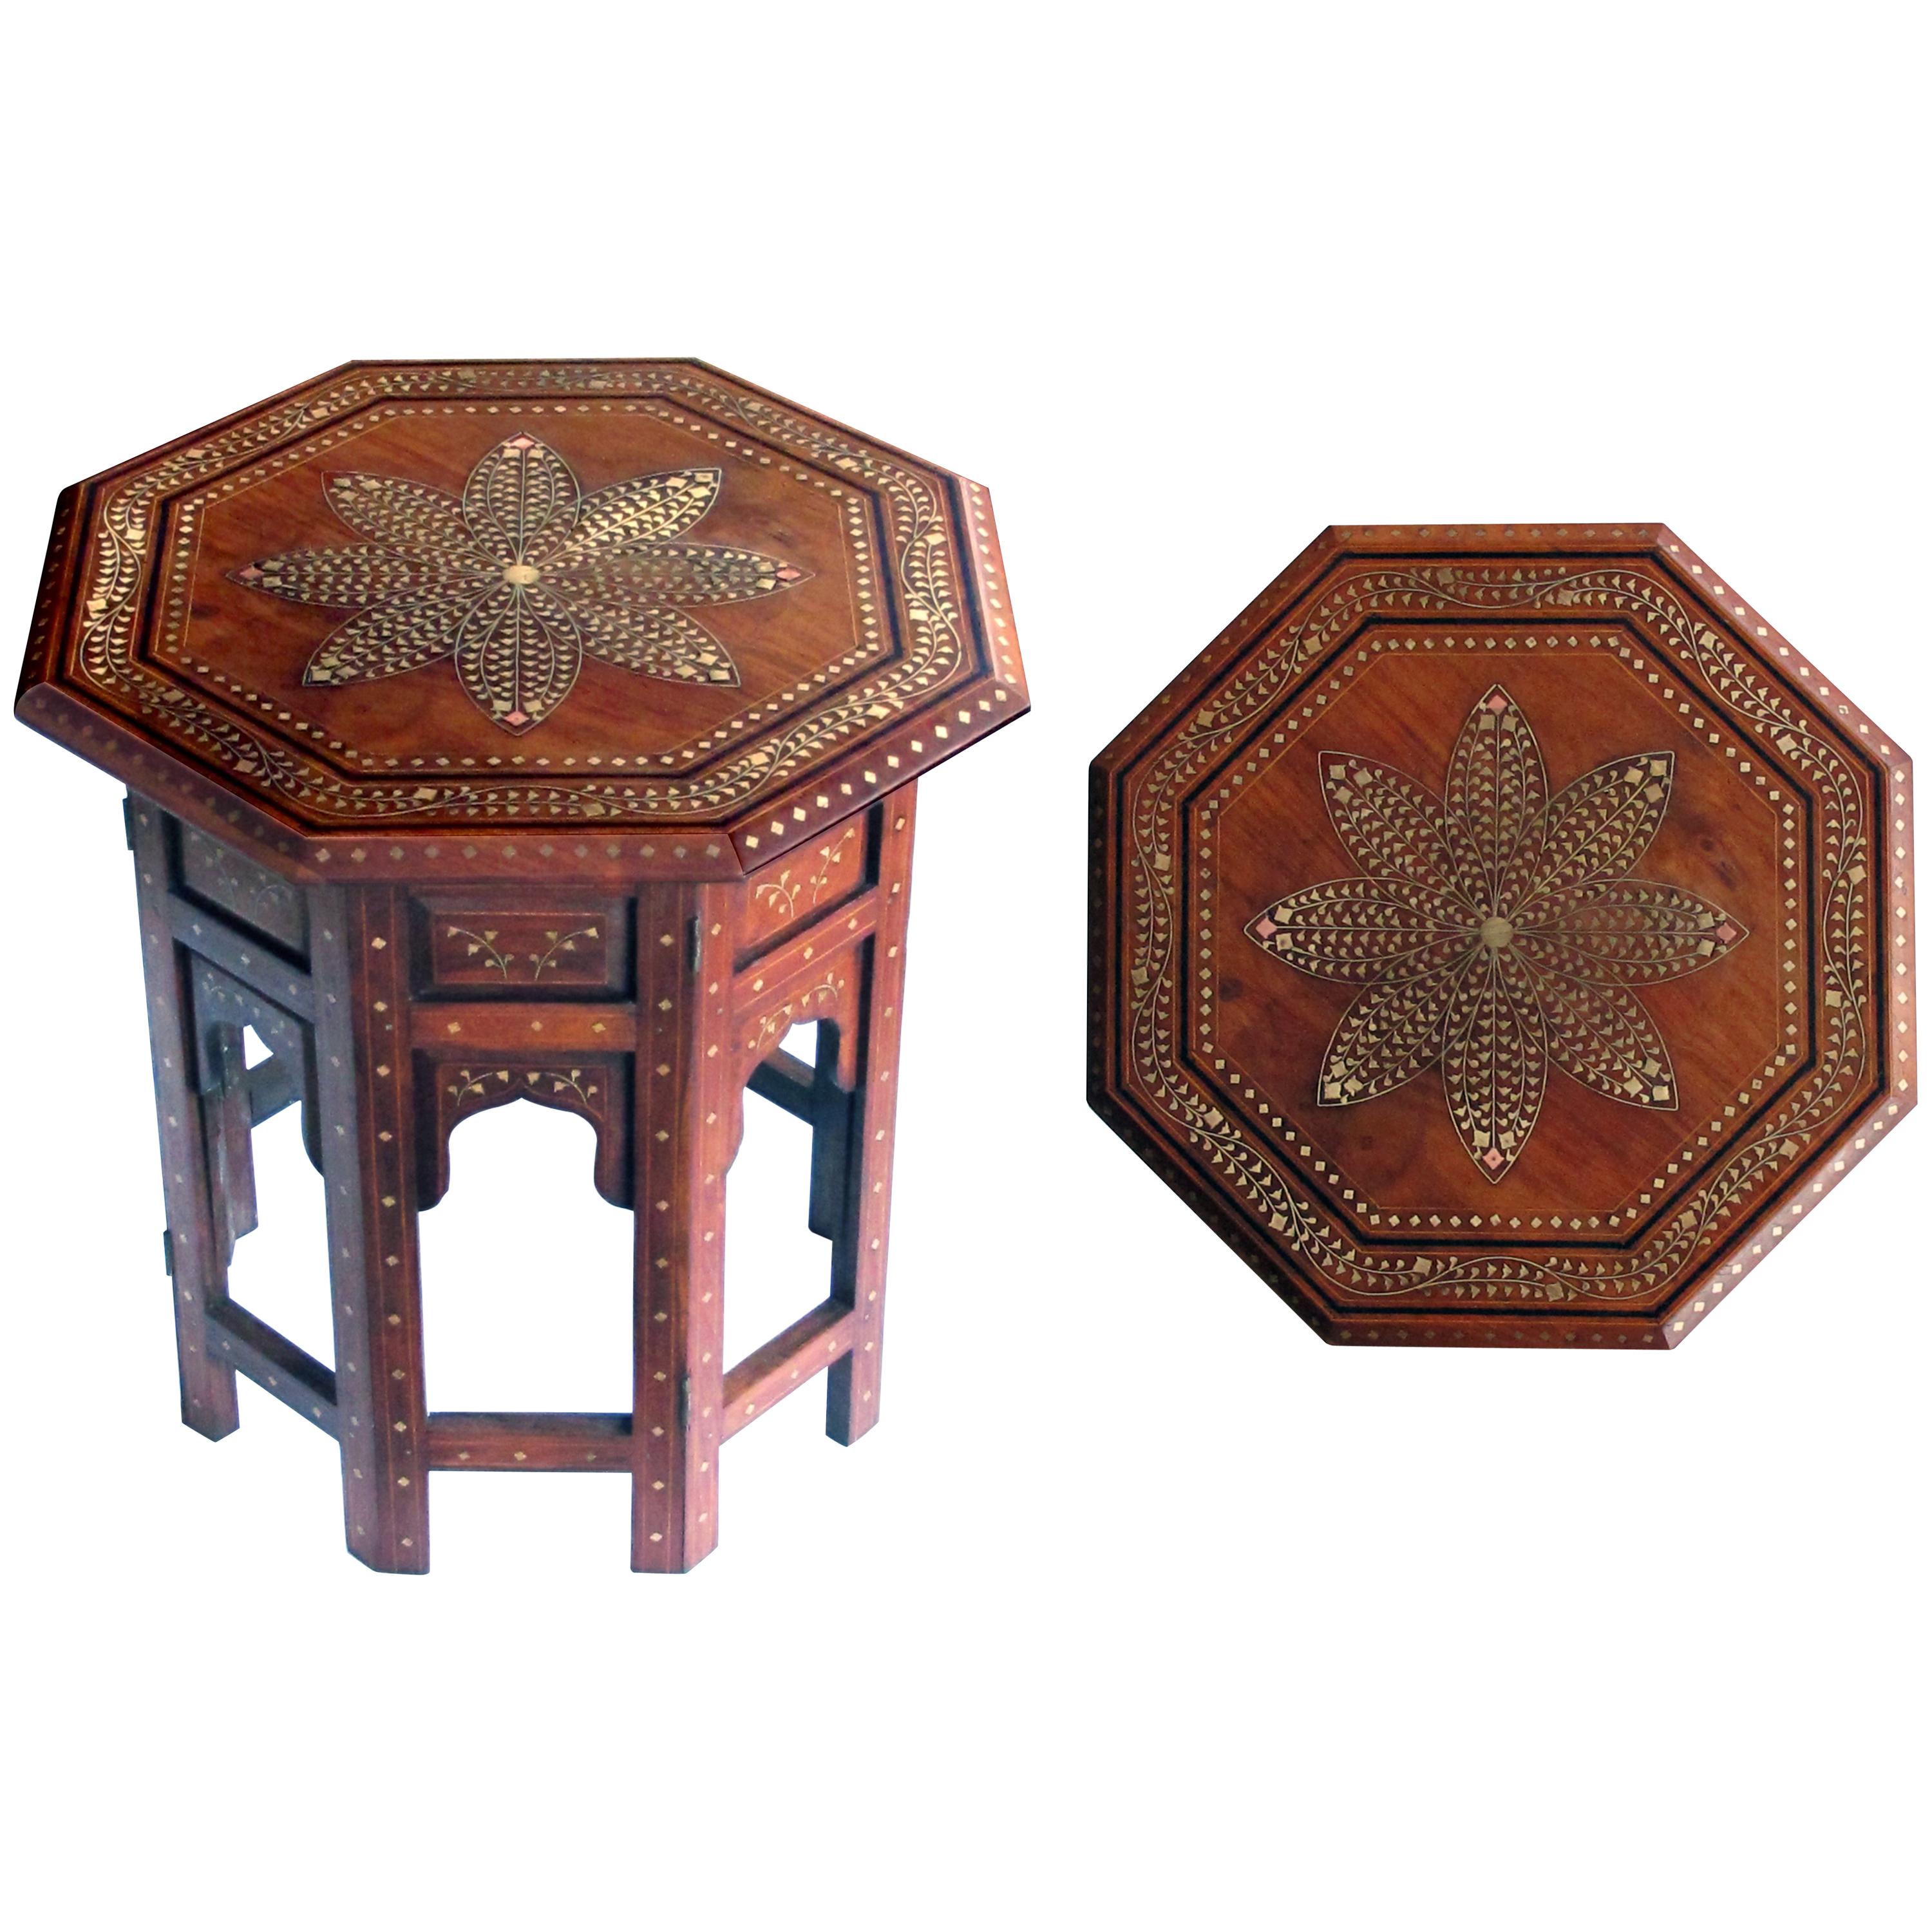 Intricately Inlaid Anglo Indian Octagonal Side-Tea Table with Brass Inlay